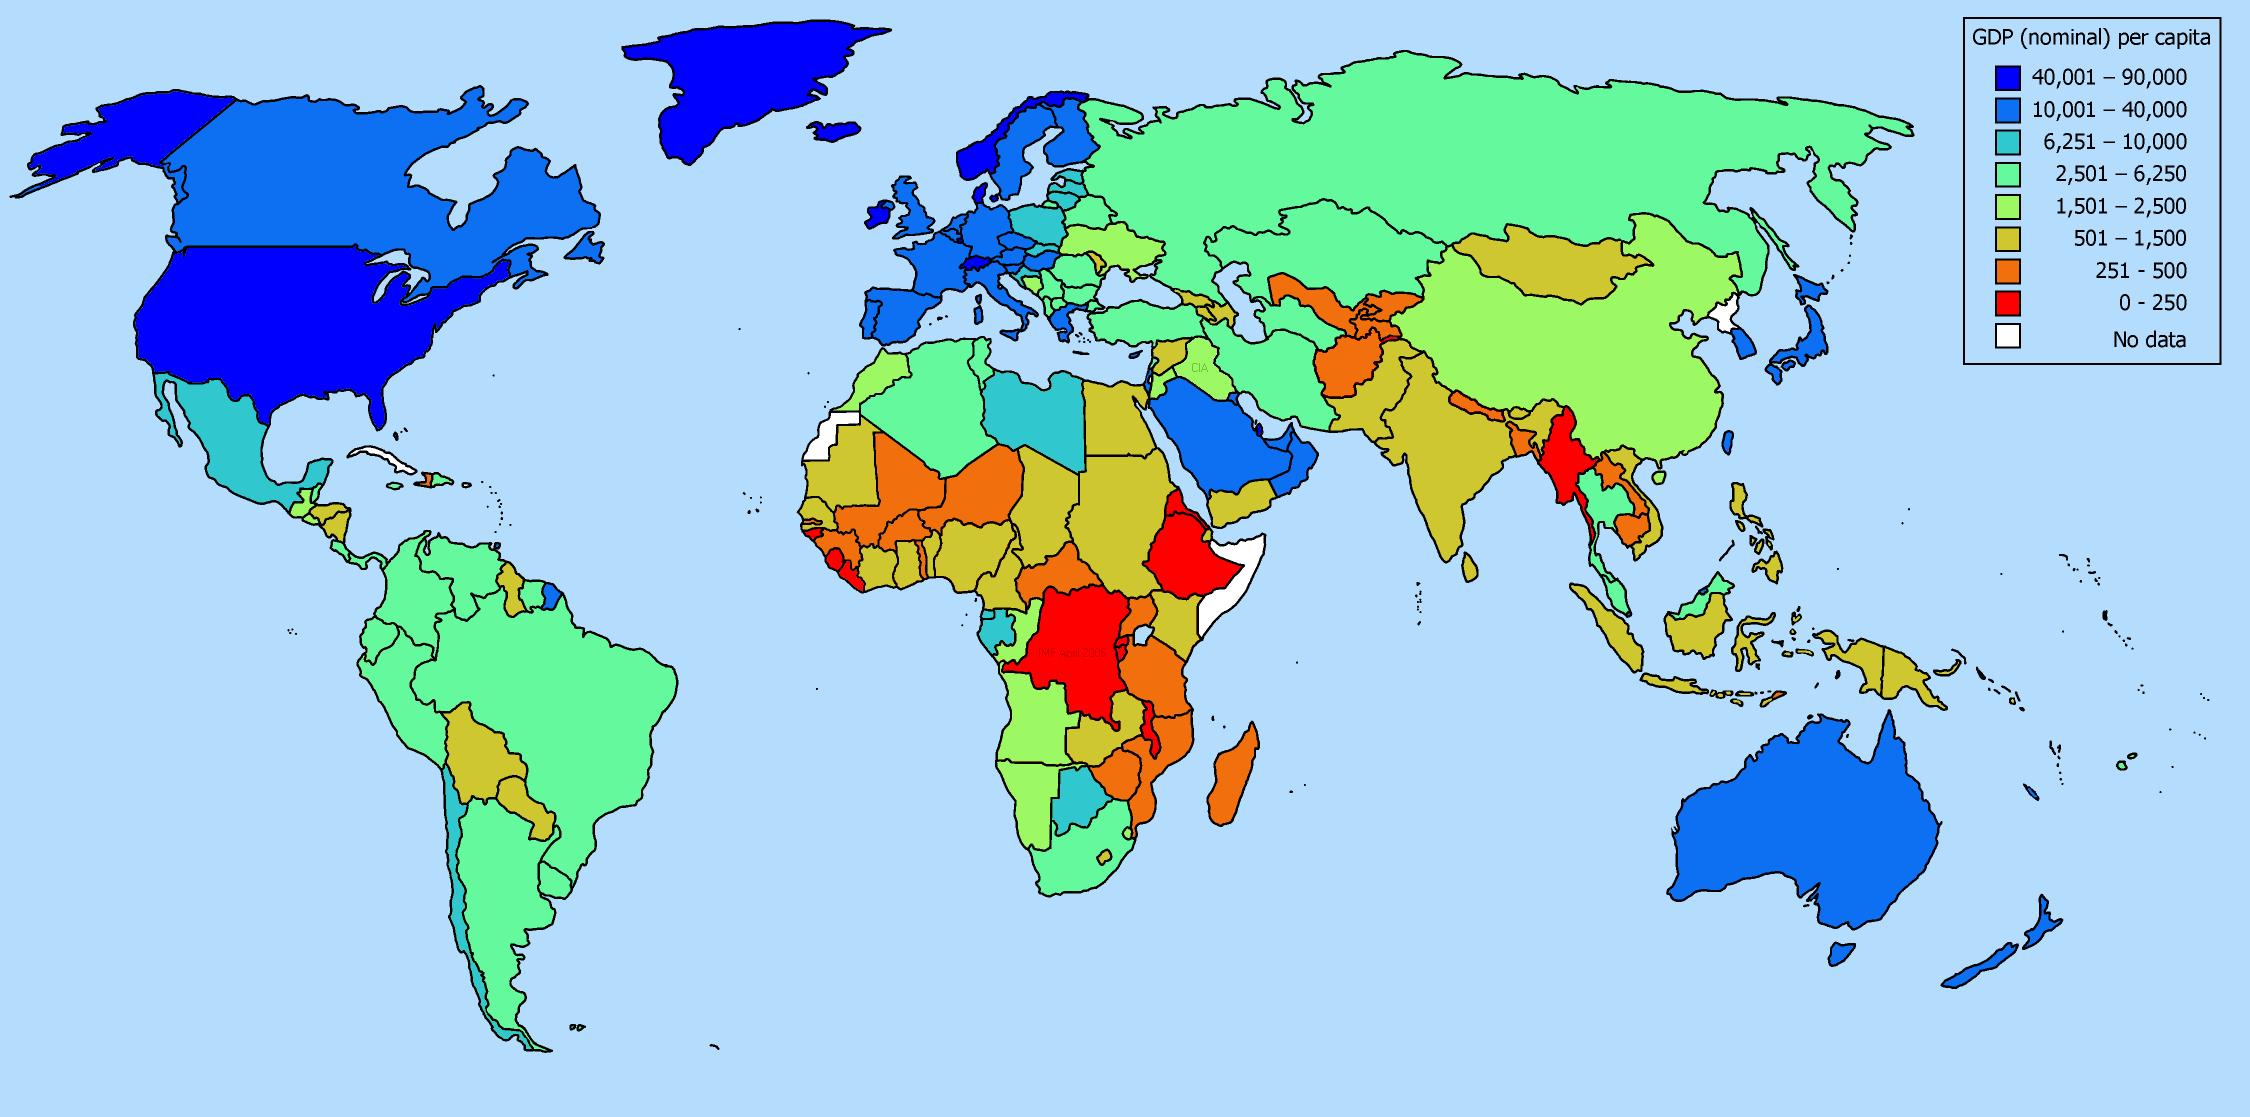 GDP_nominal_per_capita_world_map_IMF_figures_for_year_2005.png